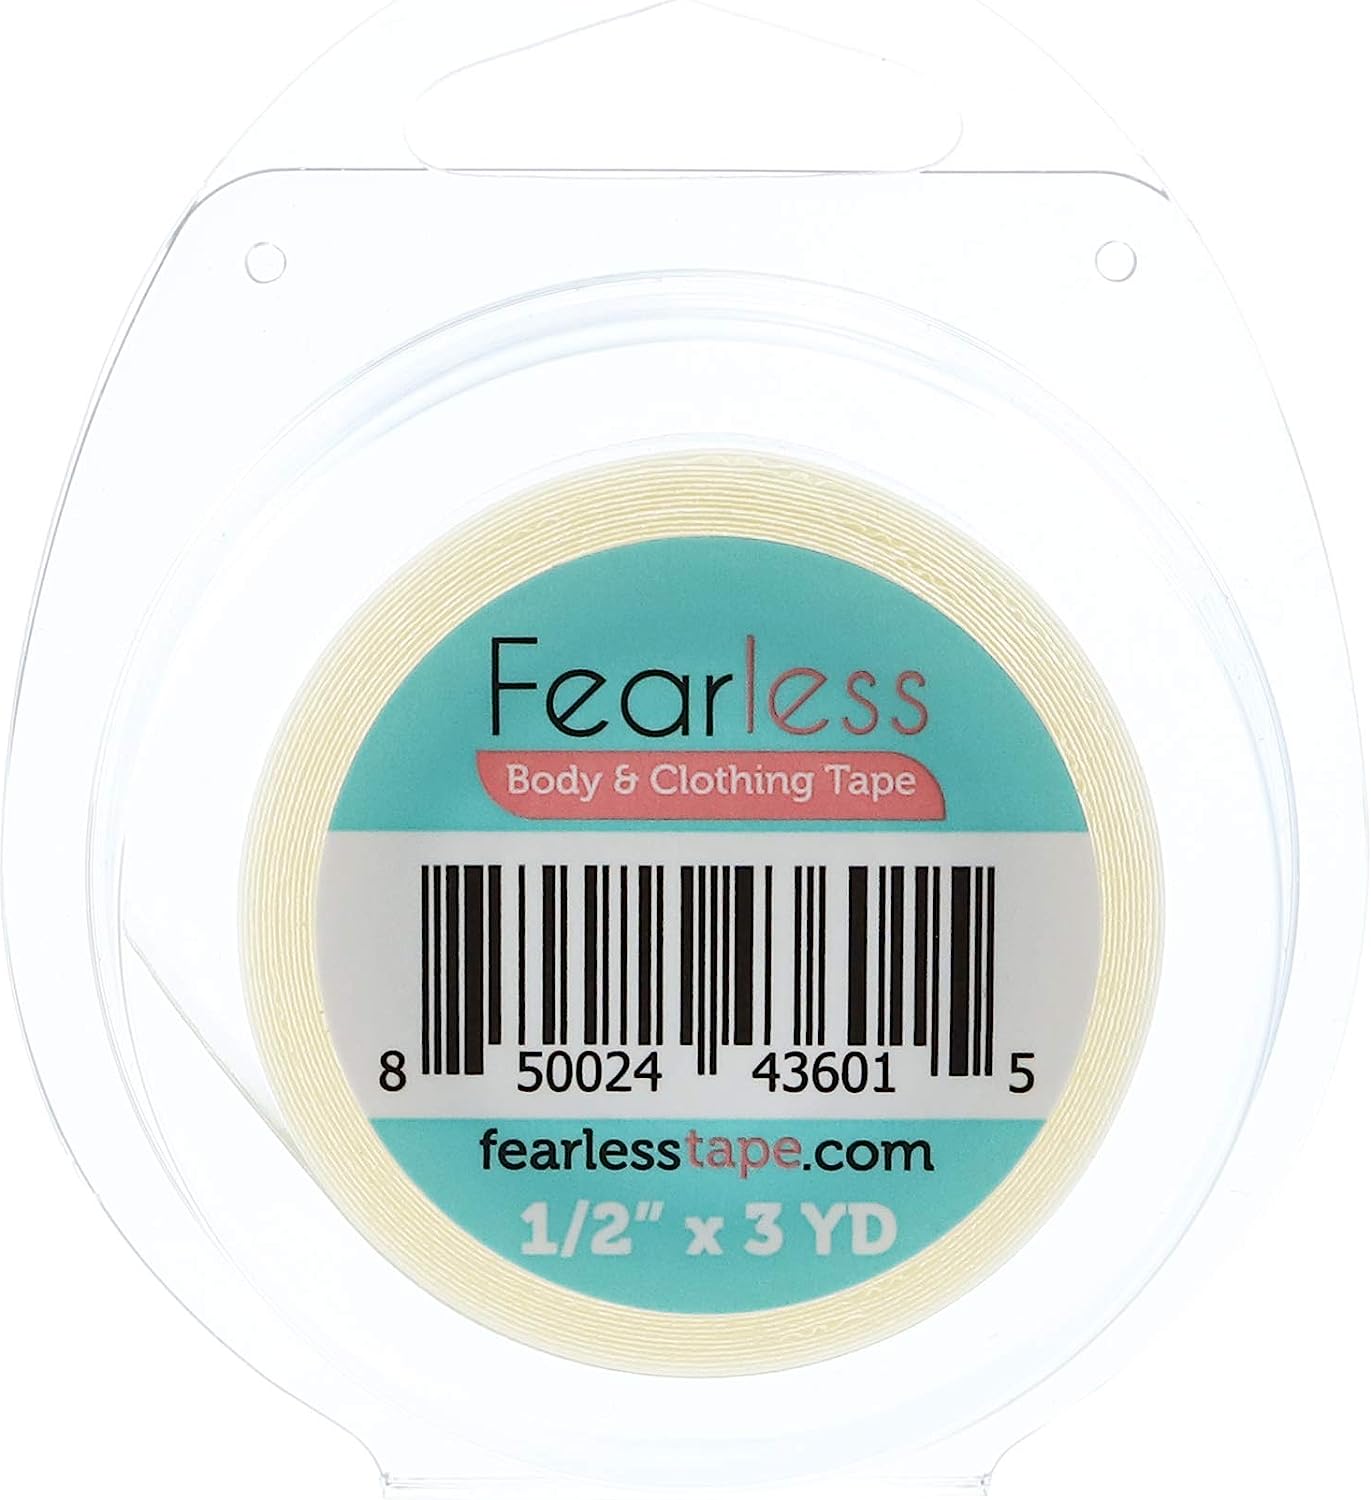 Fearless Tape - Womens Double Sided Tape for Clothing [...]